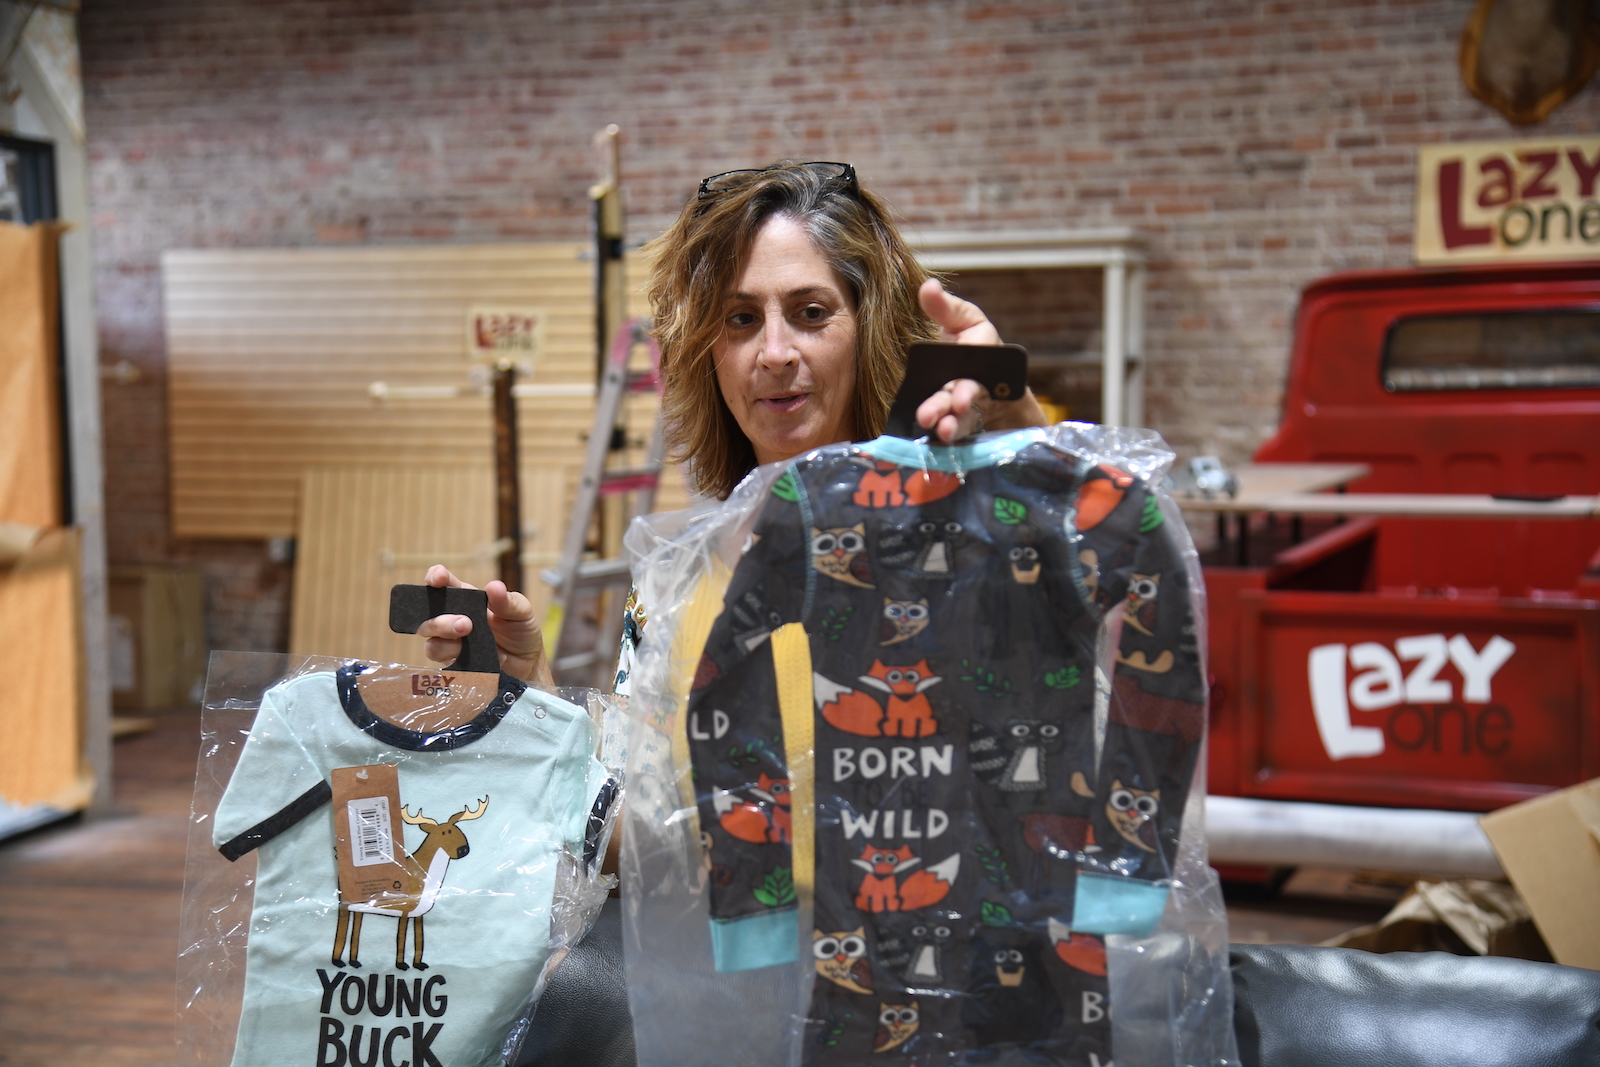 WATCH | Behind the Business: Lazy One will bring comfy, cozy apparel to ...